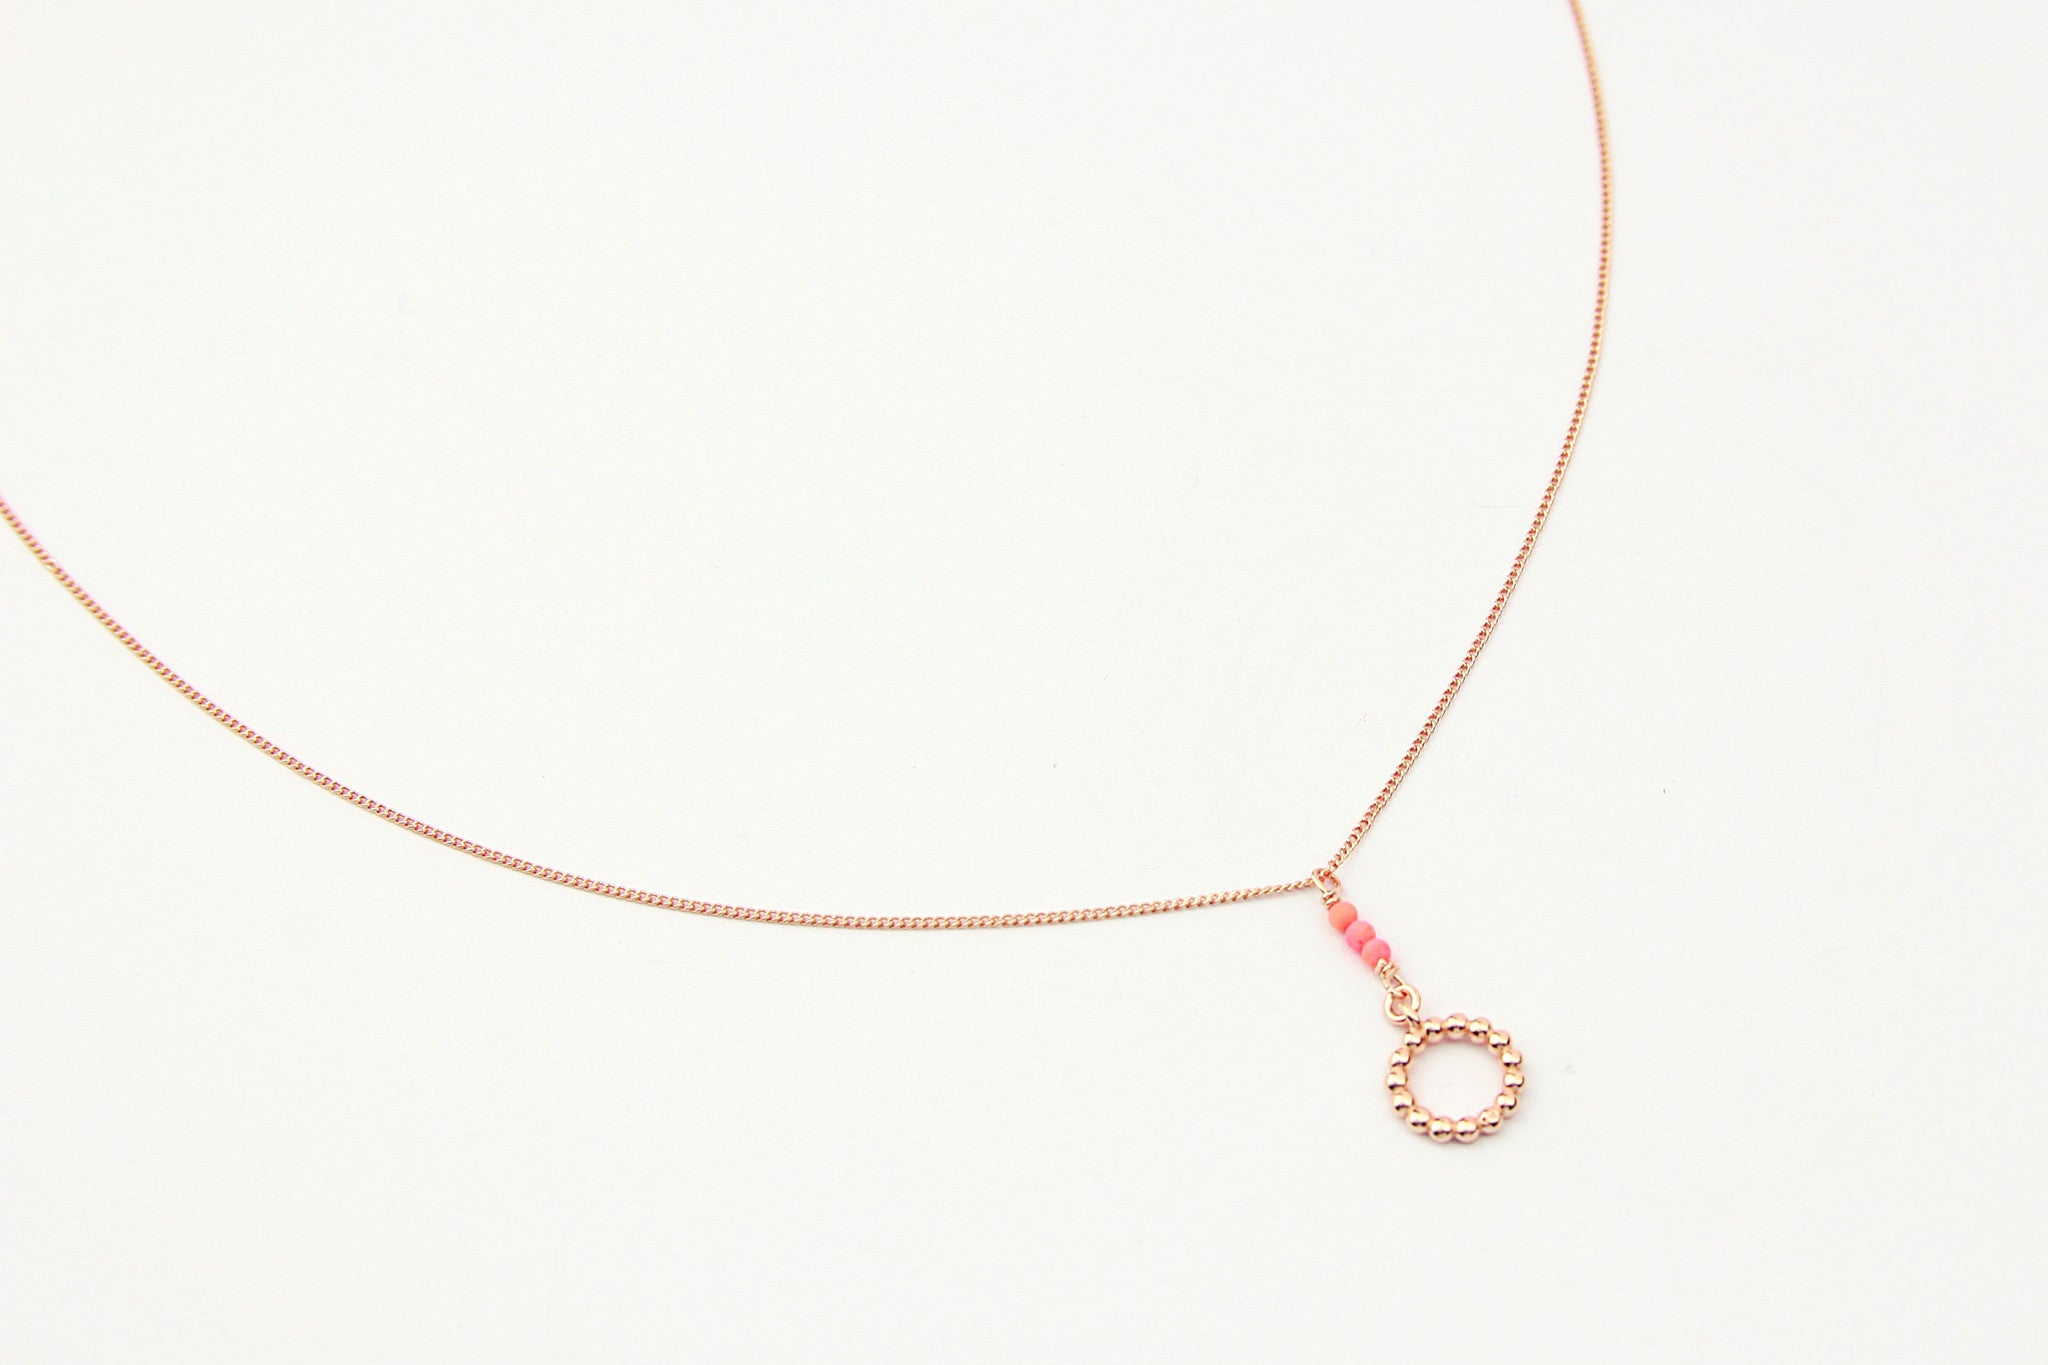 fine jewelry handmade with love fairtrade jewelberry necklace kette medium pearls coral rose gold plated sterling silver